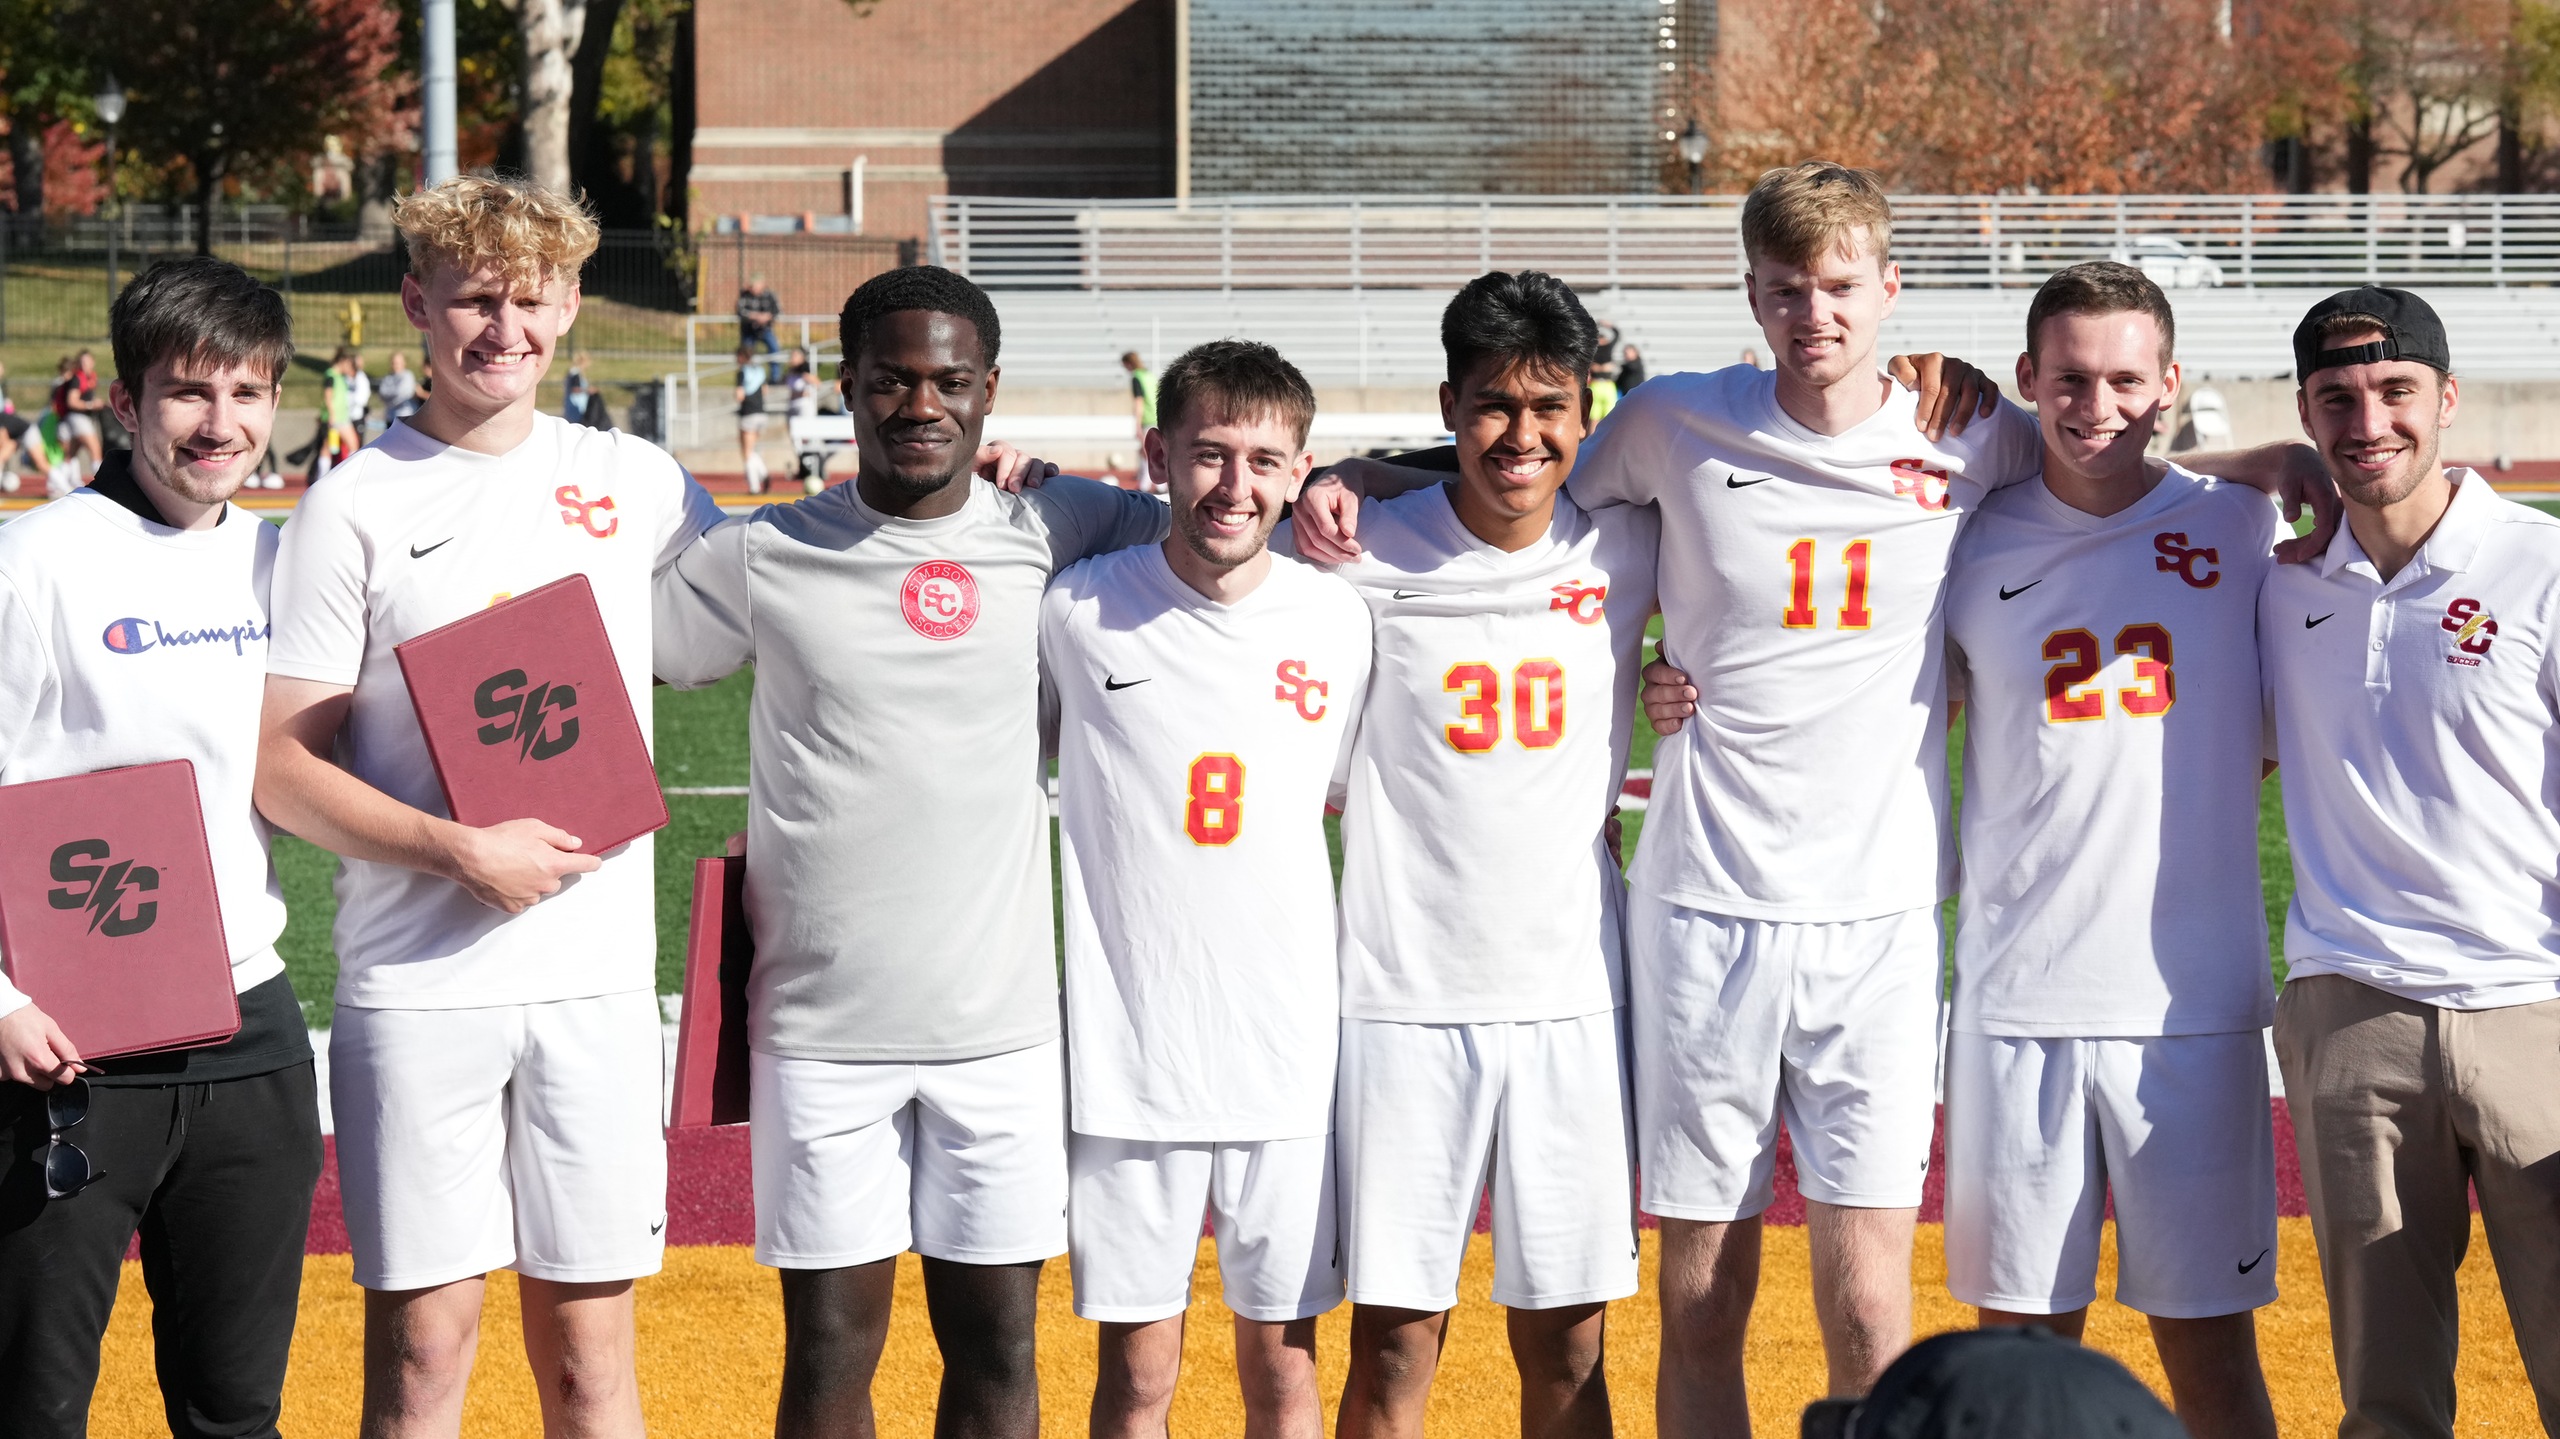 From left to right: Louie Hoehle, Sam Hying, Ethan Larbi, Matt Hasken, Ronaldo Ordaz, Ben Reynolds, Nate Thompson, Andrew Russell (photo by Chad Timm)